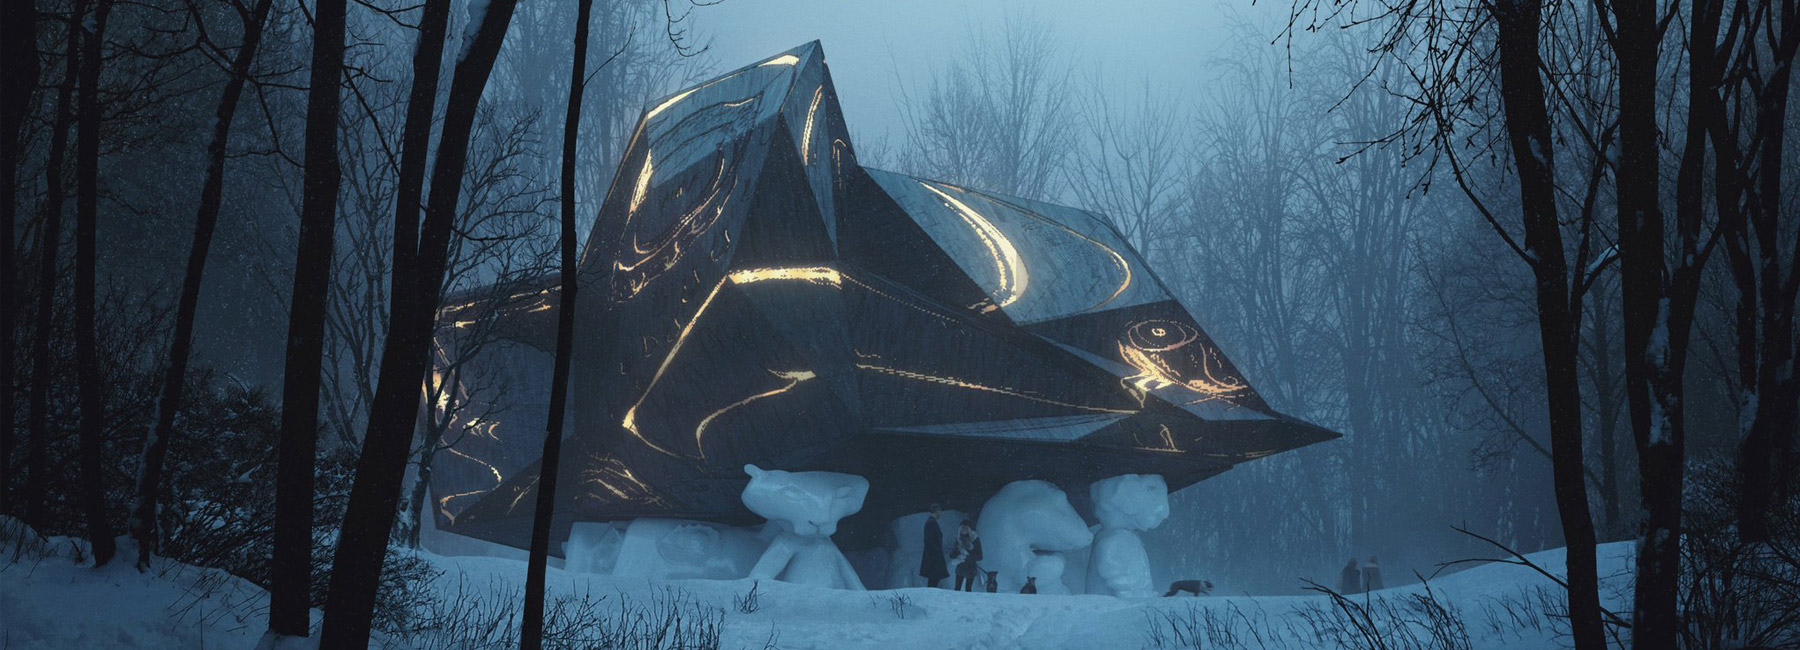 UPDATE: snÃ¸hetta's controversial 'a house to die in' project rejected by norway authorities